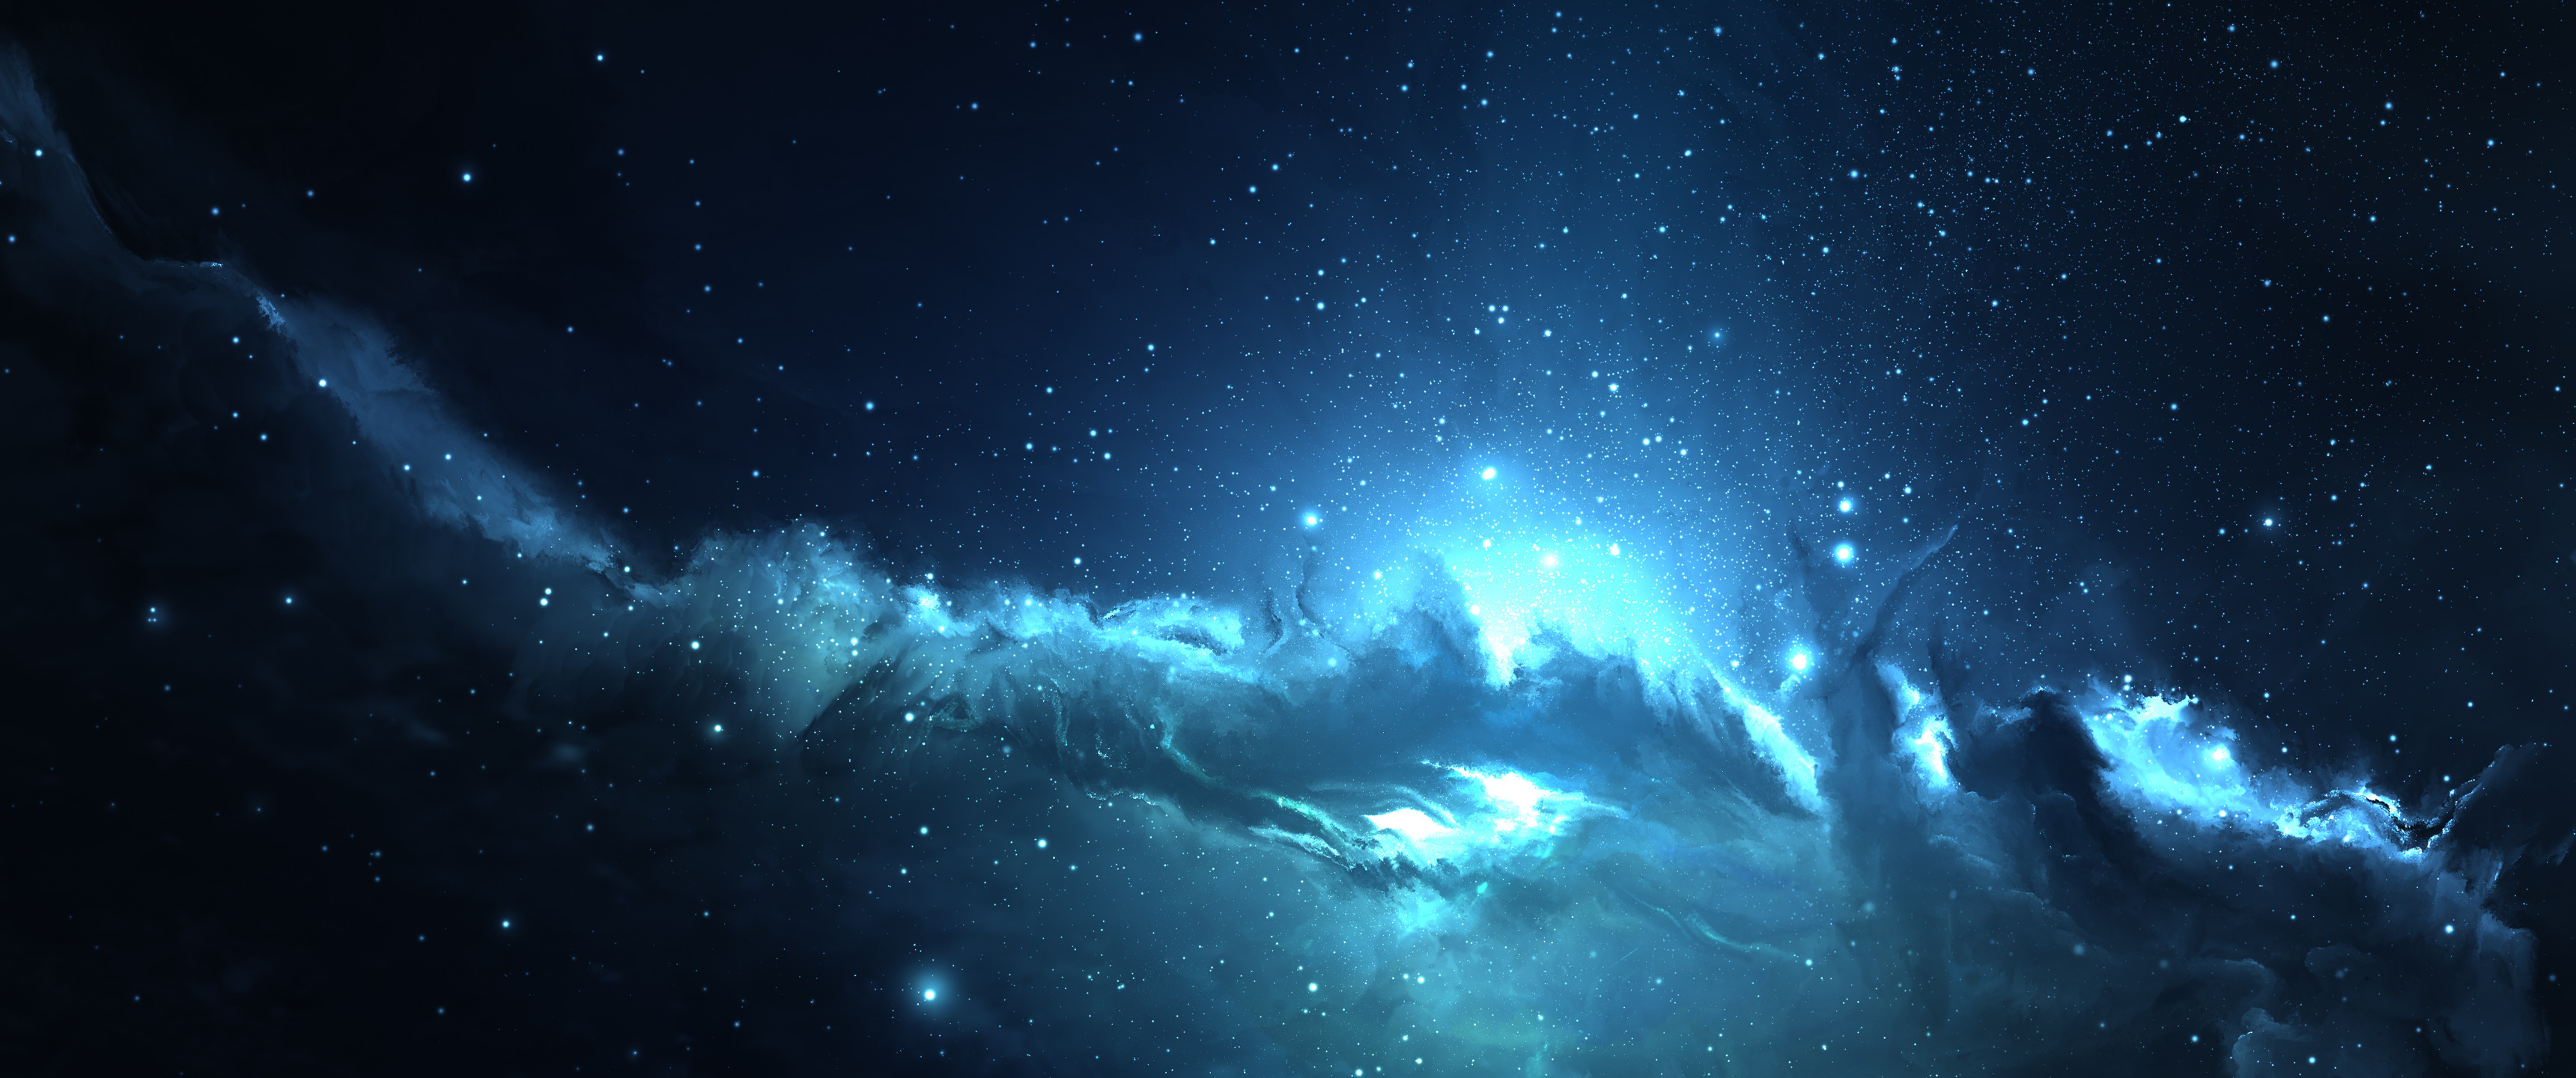 ultrawide, Astrophotography, Space, Blue Wallpaper